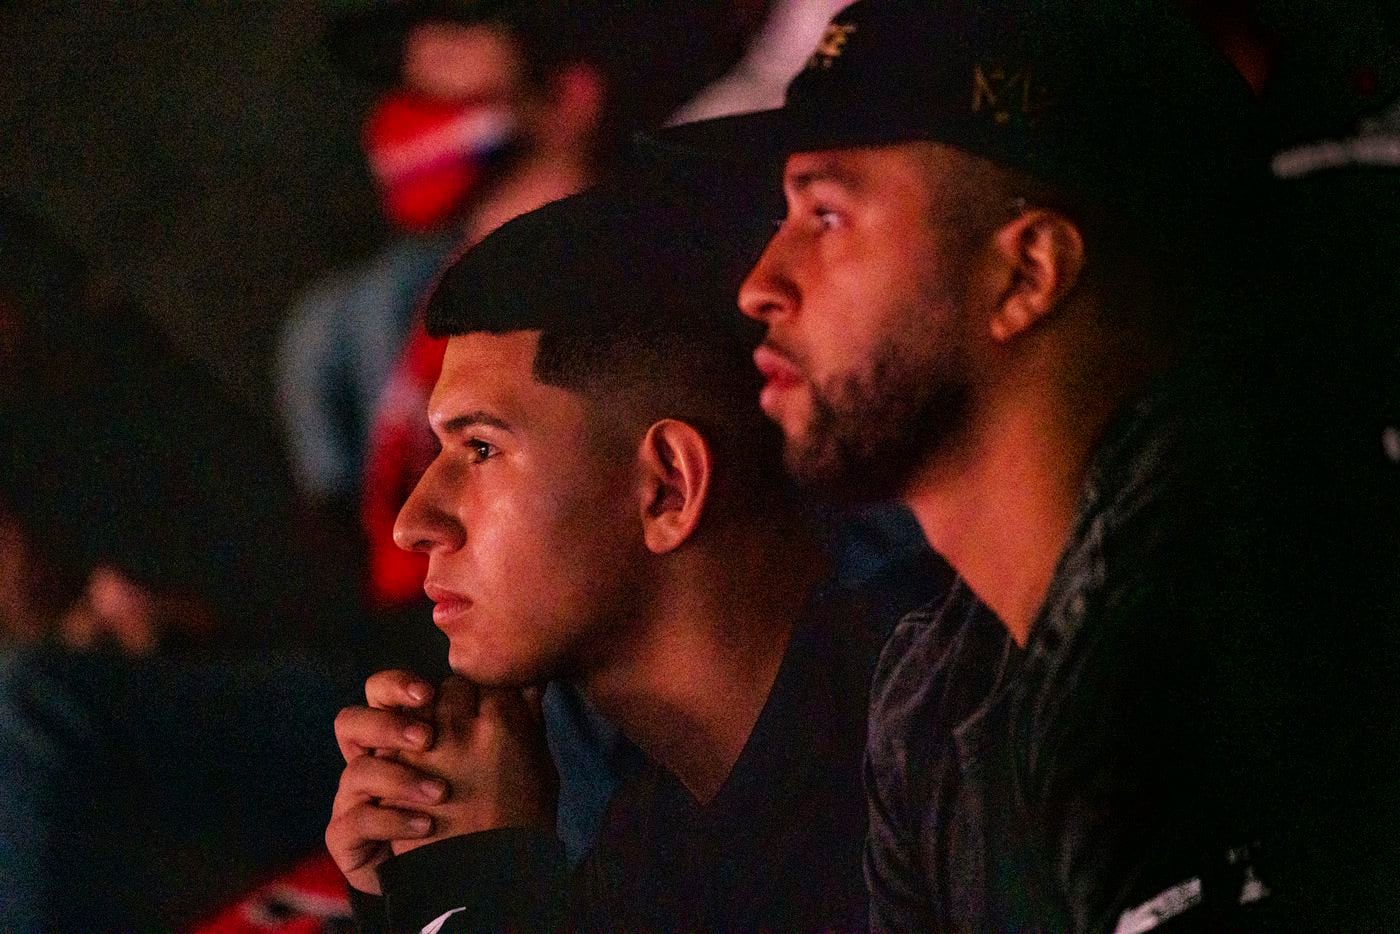 From left, Anthony “Shotzzy” Cuevas-Castro brothers Steven Quevedo, Gabriel Castro, and his mother Christina Hernandez  watch Shotzzy compete during the winners final of the Call of Duty league playoffs at the Galen Center on Saturday, August 21, 2021 in Los Angeles, California. The Empire lost to FaZe 0 - 3 in their first match of the day but are still in contention to play in the finals through the elimination finals. (Justin L. Stewart/Special Contributor)